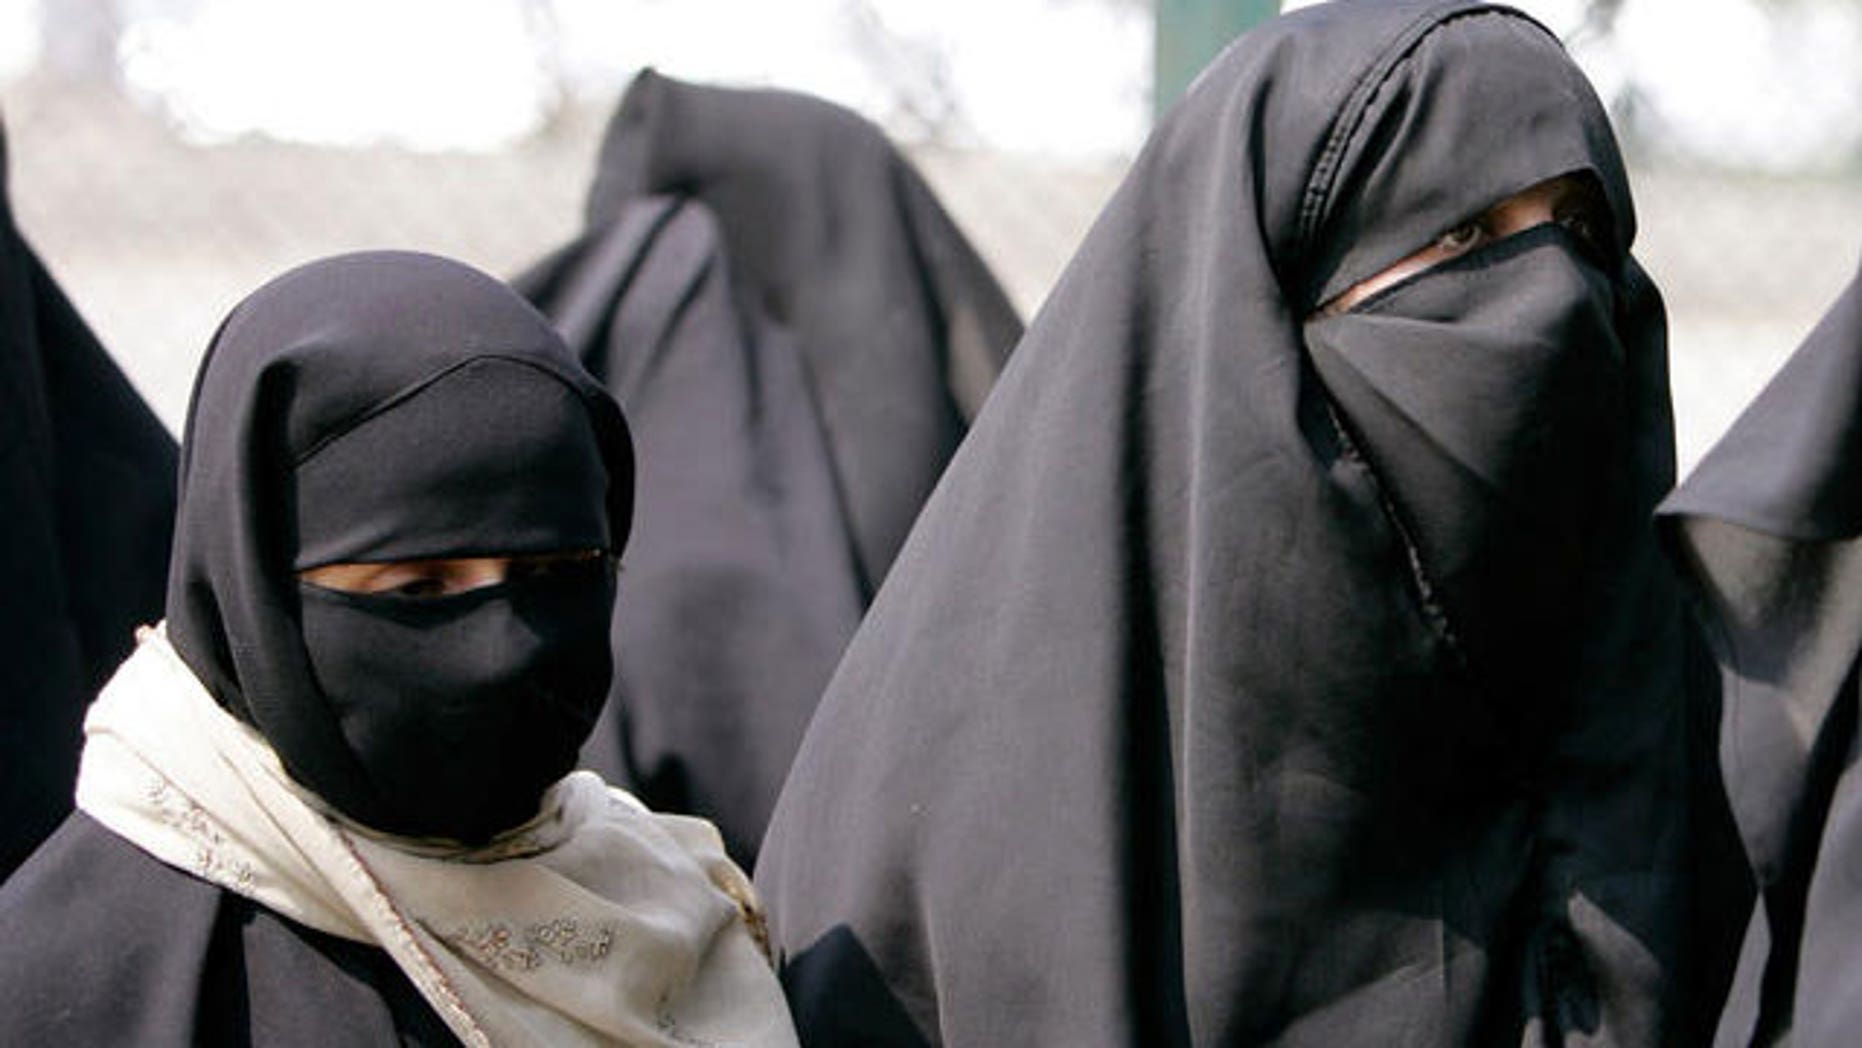 Are Burqa Inspired Fashions Glorifying Female Oppression Or Encouraging Women To Dress More